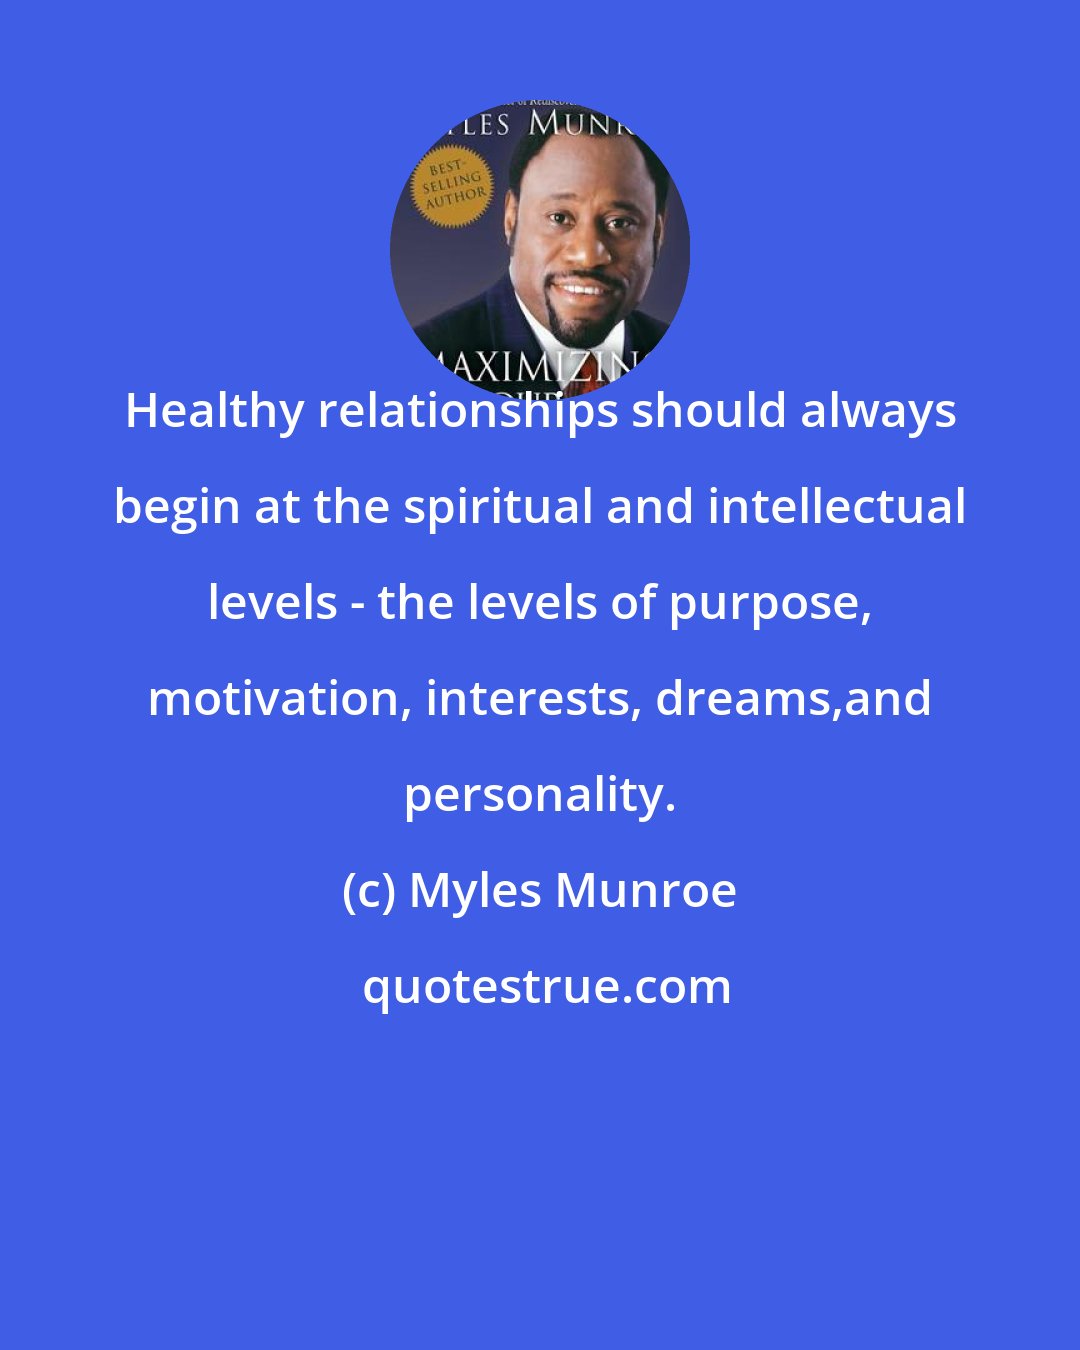 Myles Munroe: Healthy relationships should always begin at the spiritual and intellectual levels - the levels of purpose, motivation, interests, dreams,and personality.